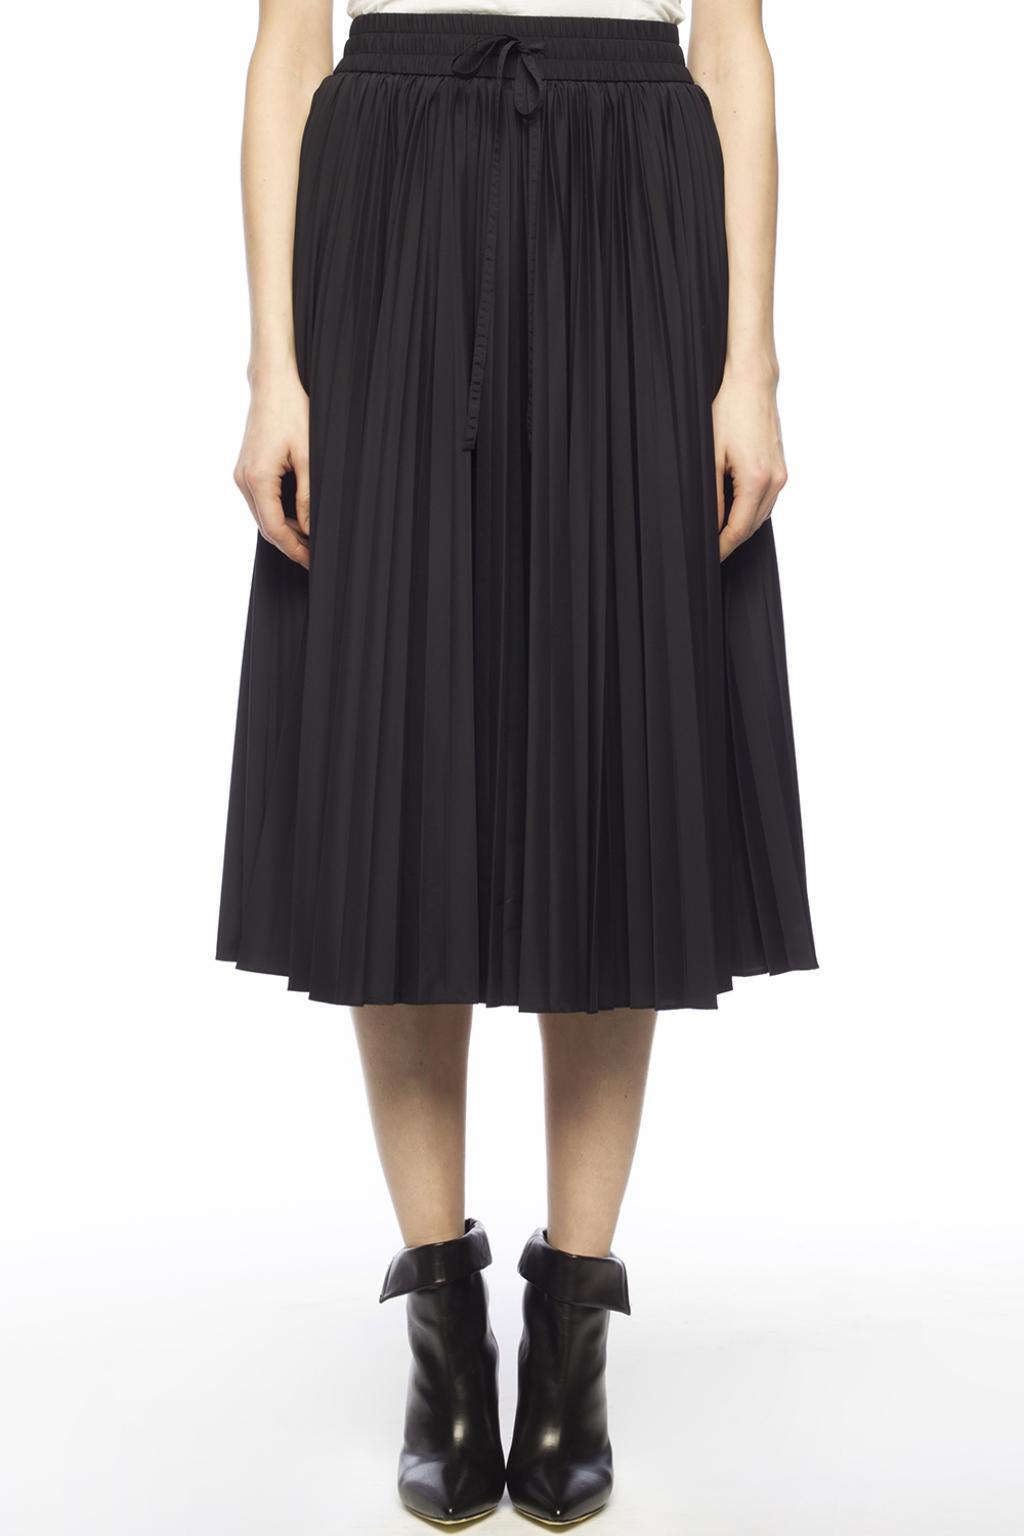 RED Valentino Synthetic Pleated Skirt in Black - Lyst